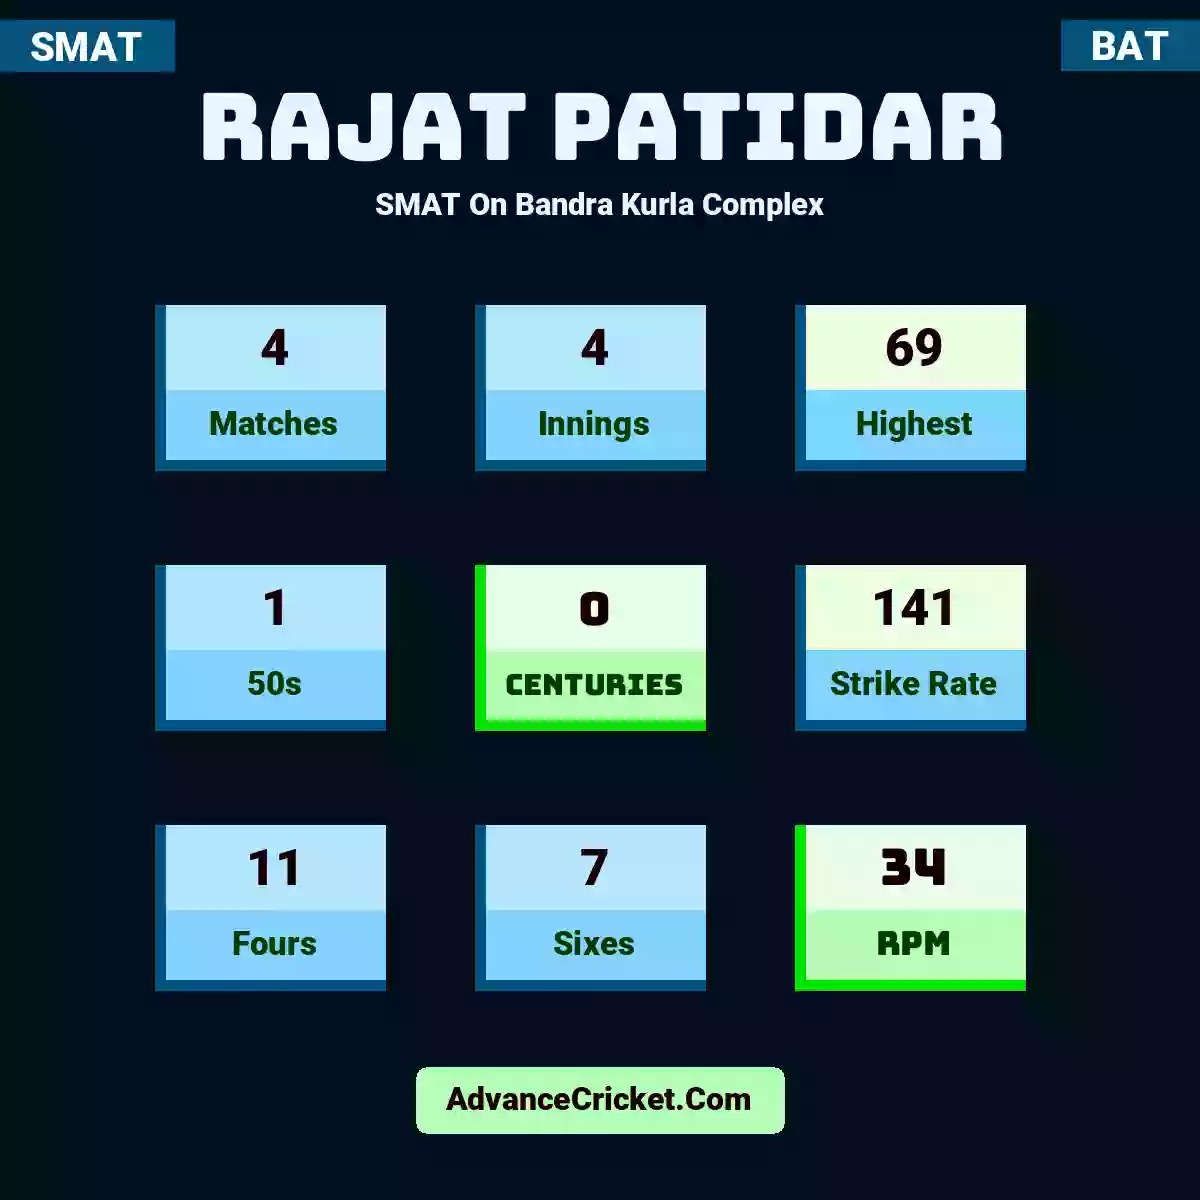 Rajat Patidar SMAT  On Bandra Kurla Complex, Rajat Patidar played 4 matches, scored 69 runs as highest, 1 half-centuries, and 0 centuries, with a strike rate of 141. R.Patidar hit 11 fours and 7 sixes, with an RPM of 34.